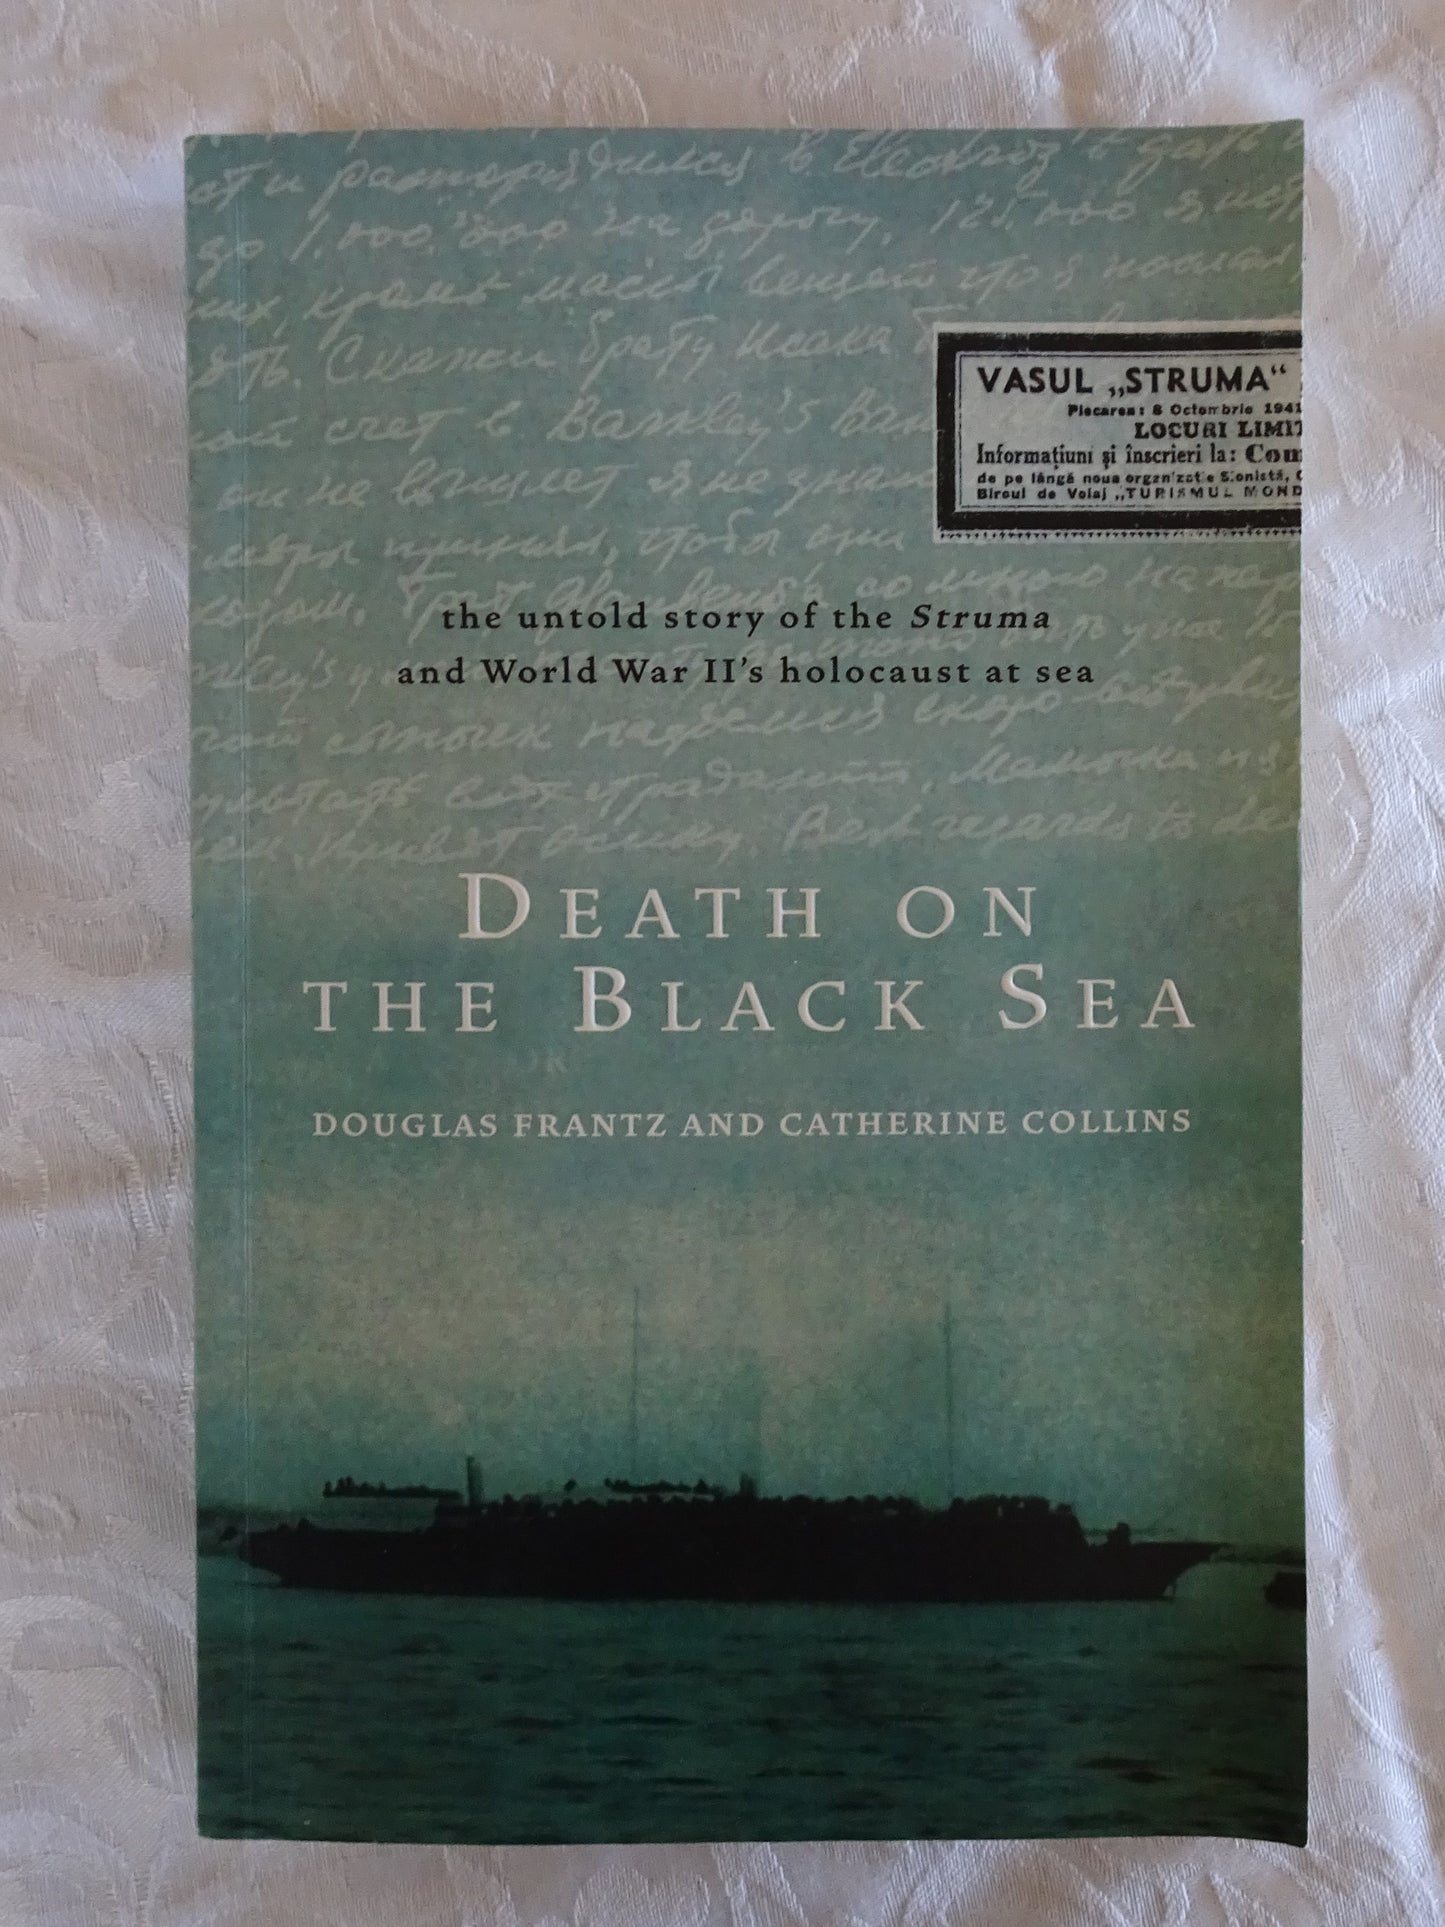 Death On The Black Sea by Douglas Frantz and Catherine Collins